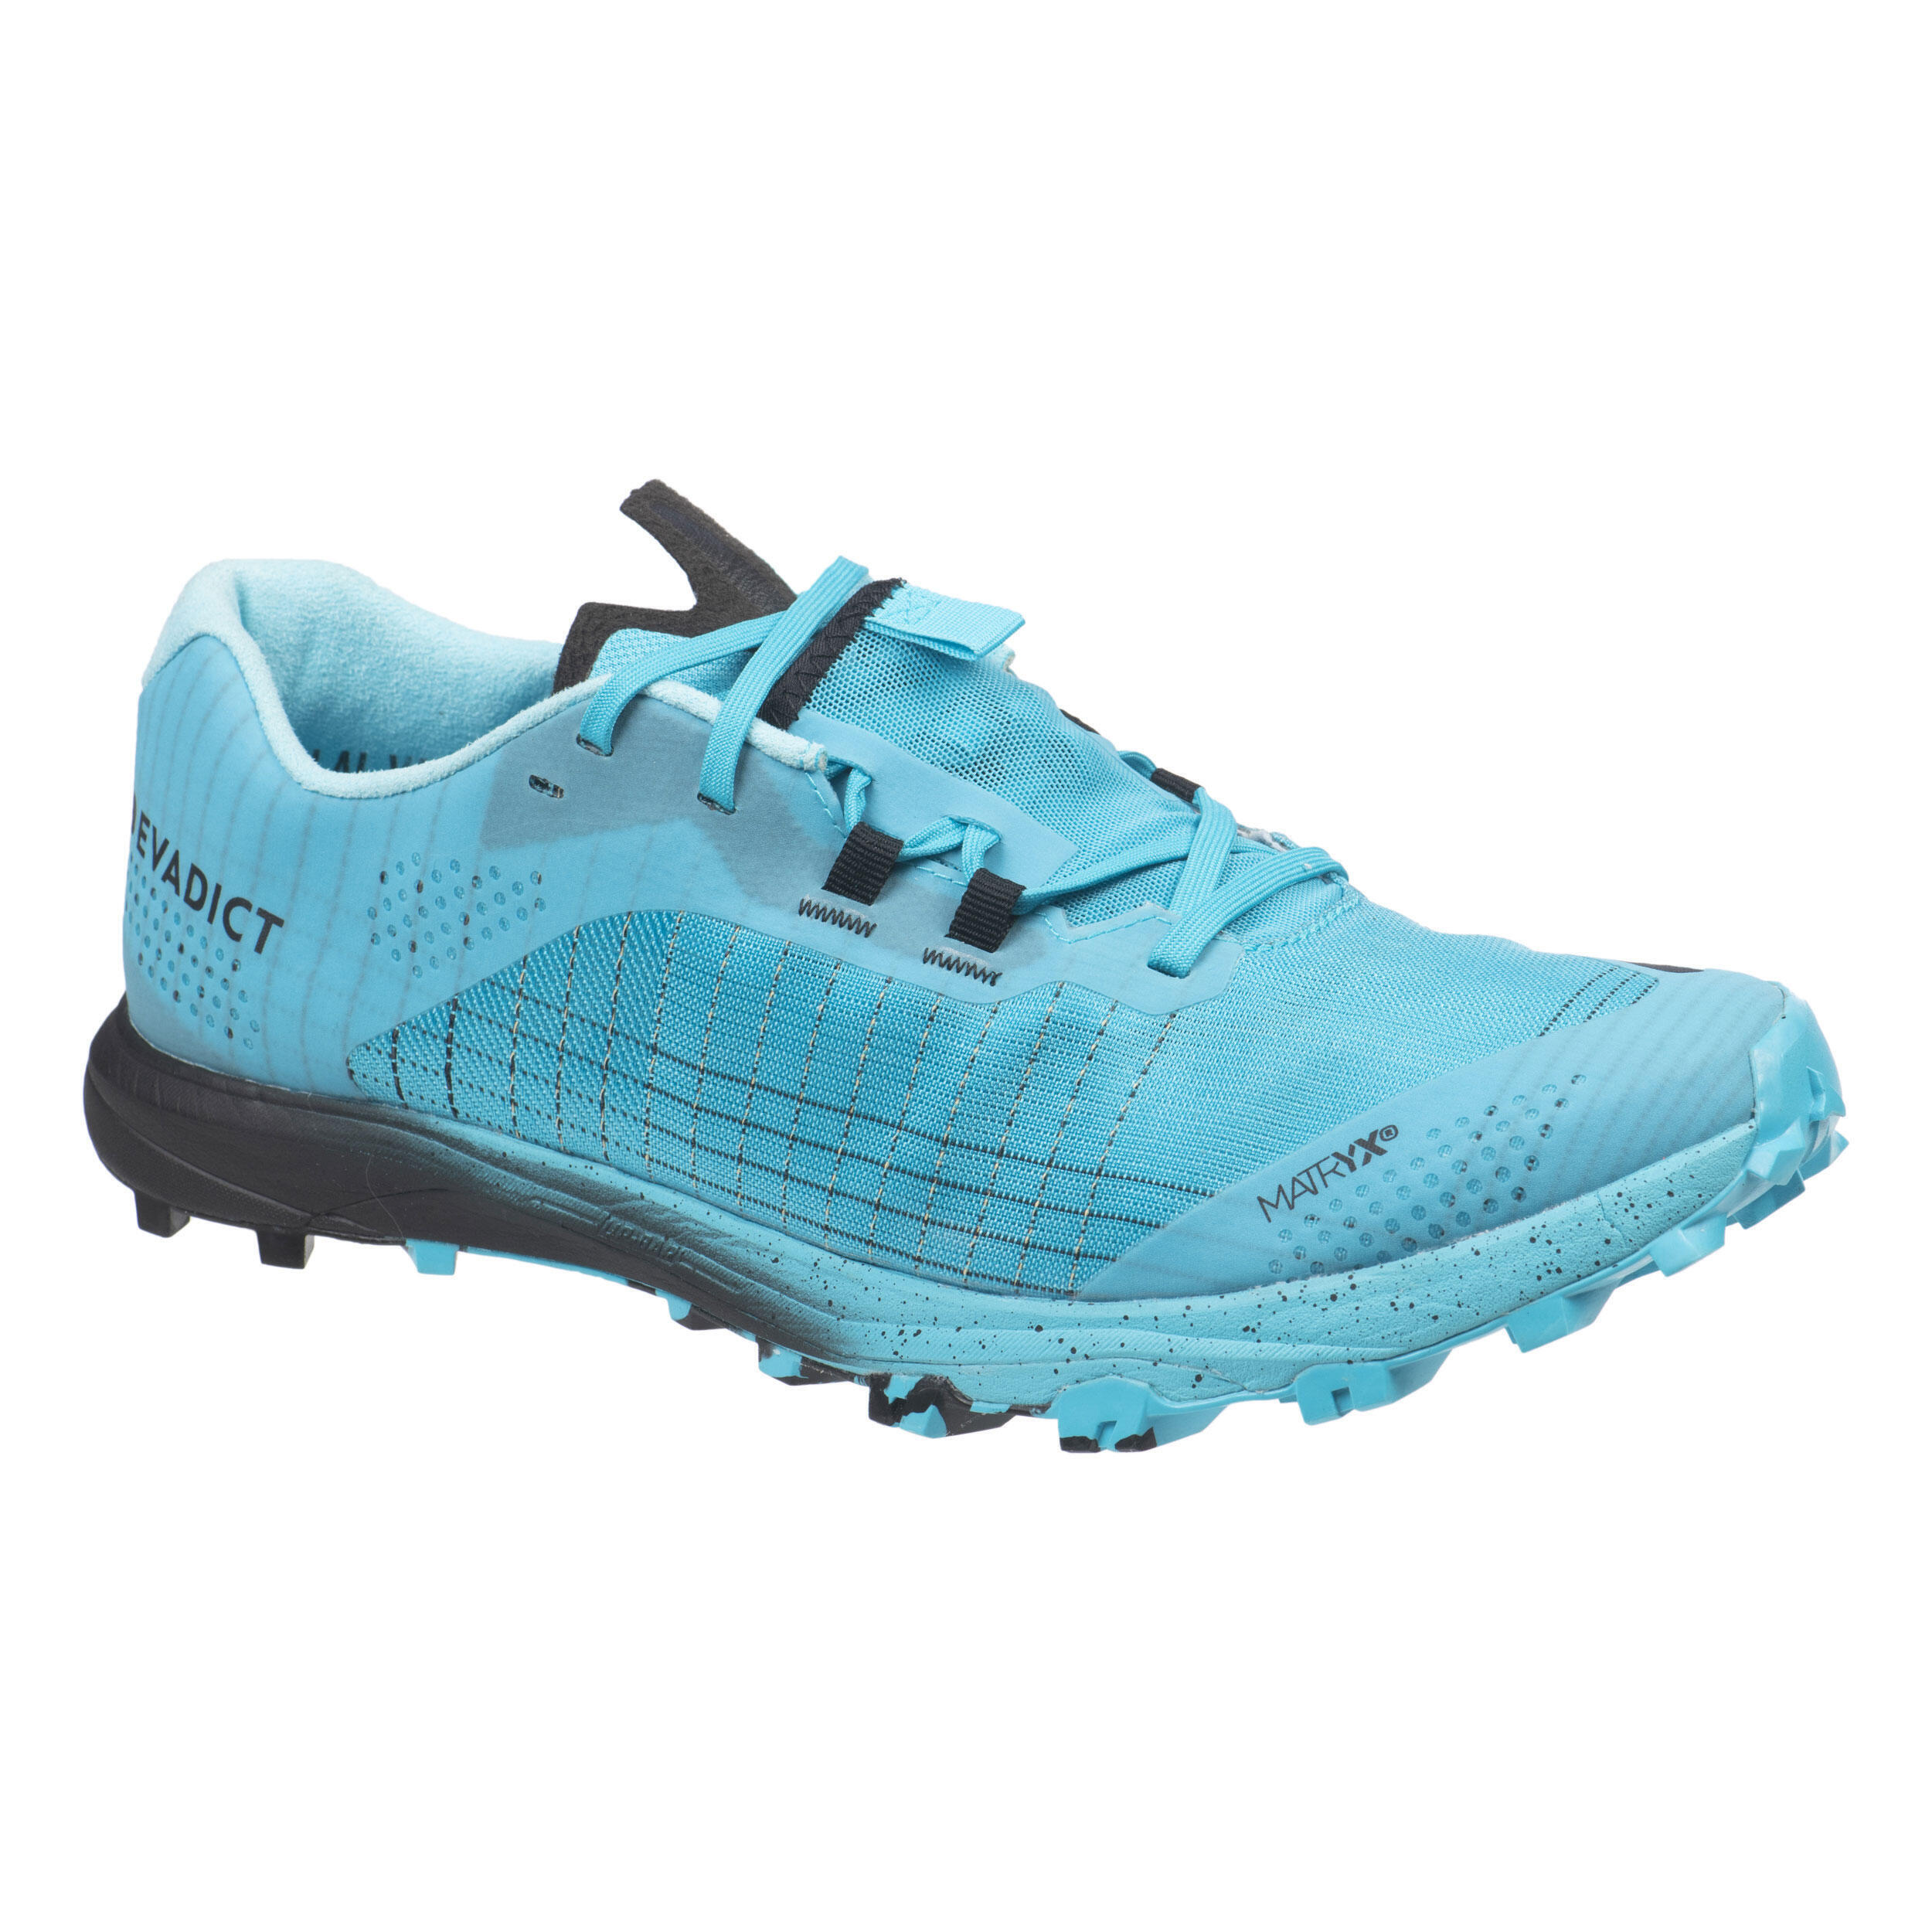 EVADICT Race Light Men's Trail Running Shoes - sky blue and black